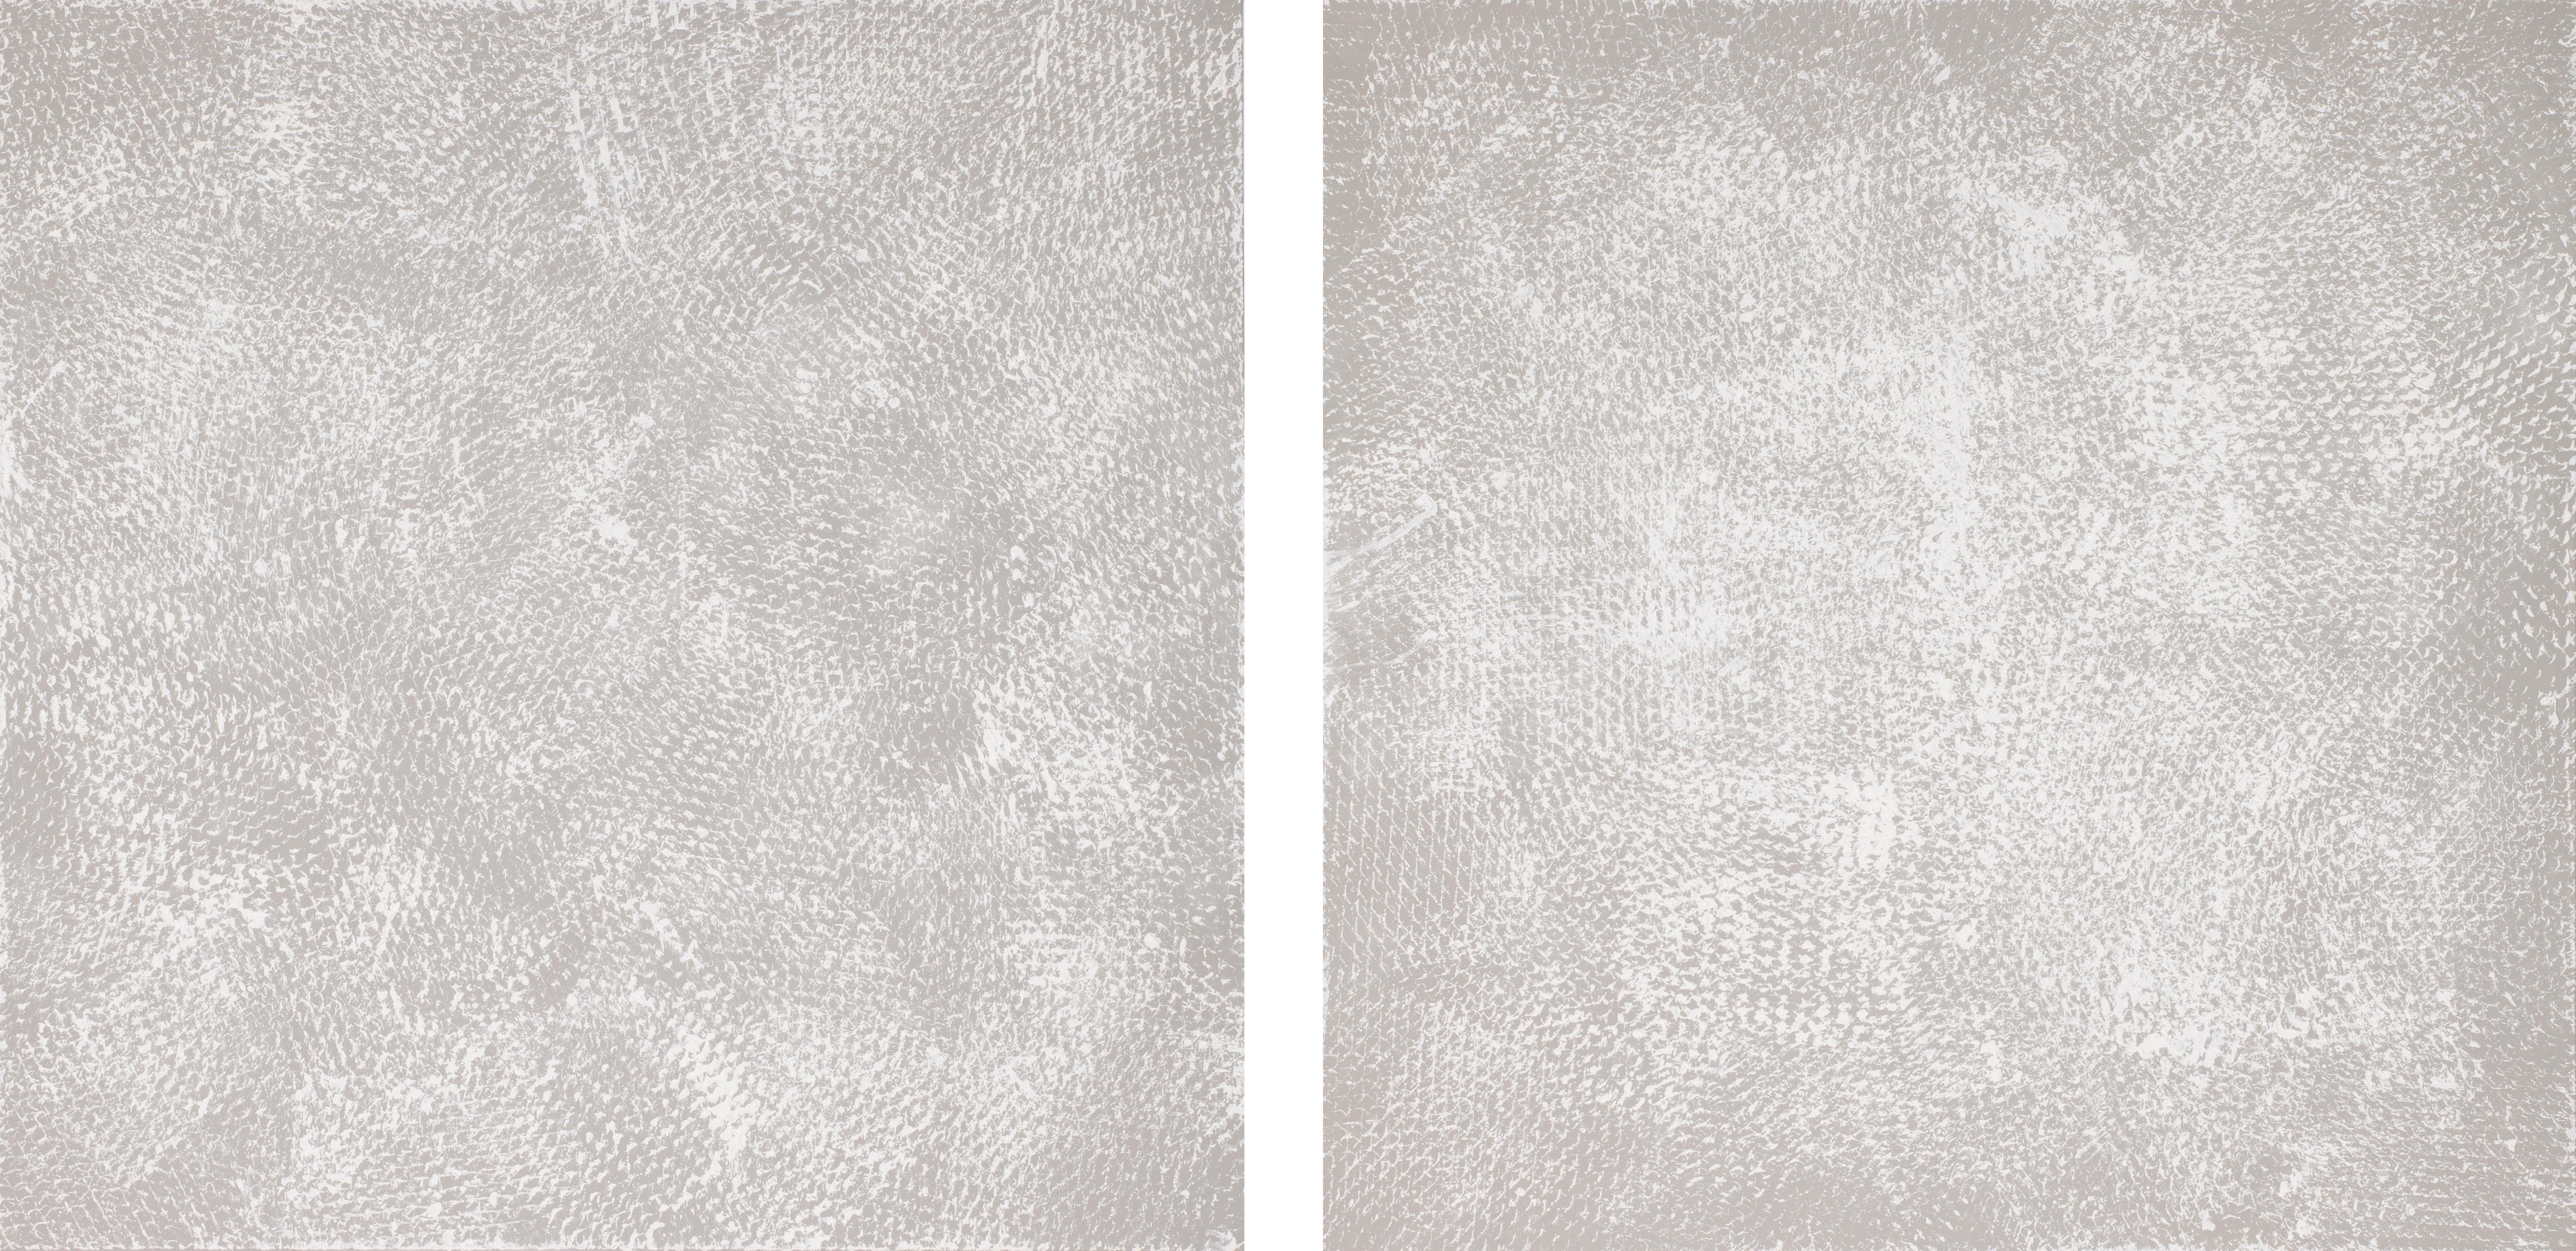 Clemens Wolf Abstract Painting - Greyn and White I and II, Expanded Metal Painting. Diptych